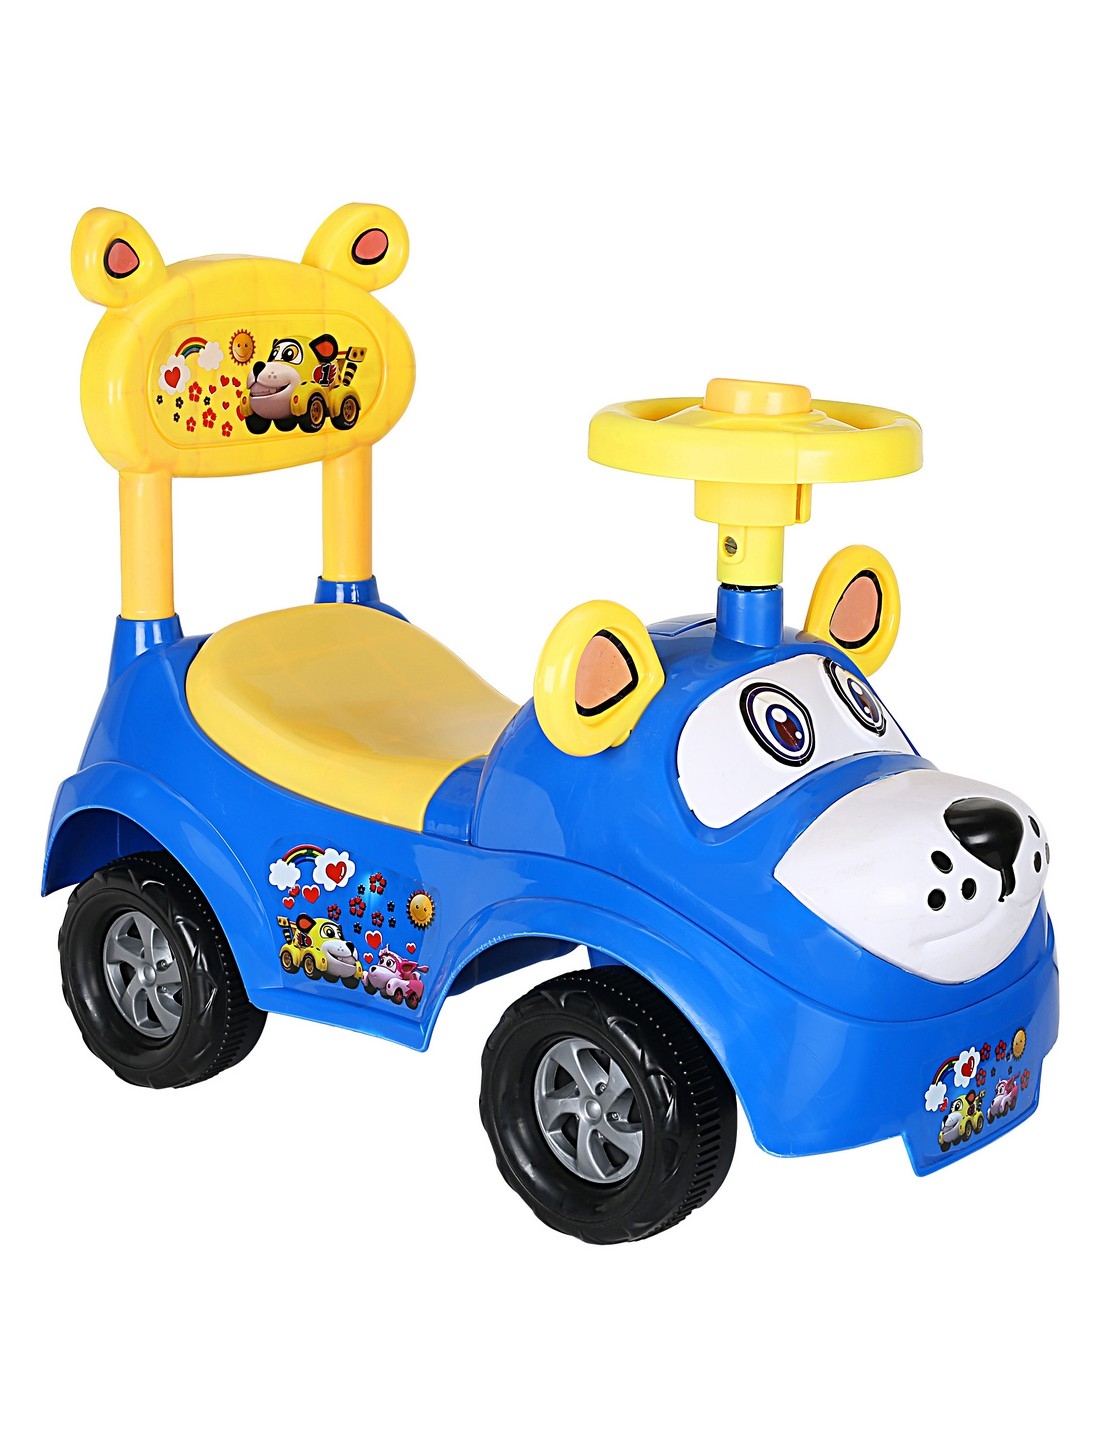 CREATURE | Creature Blue Scooby Ride-On Cars Toy Vehicle for Kids